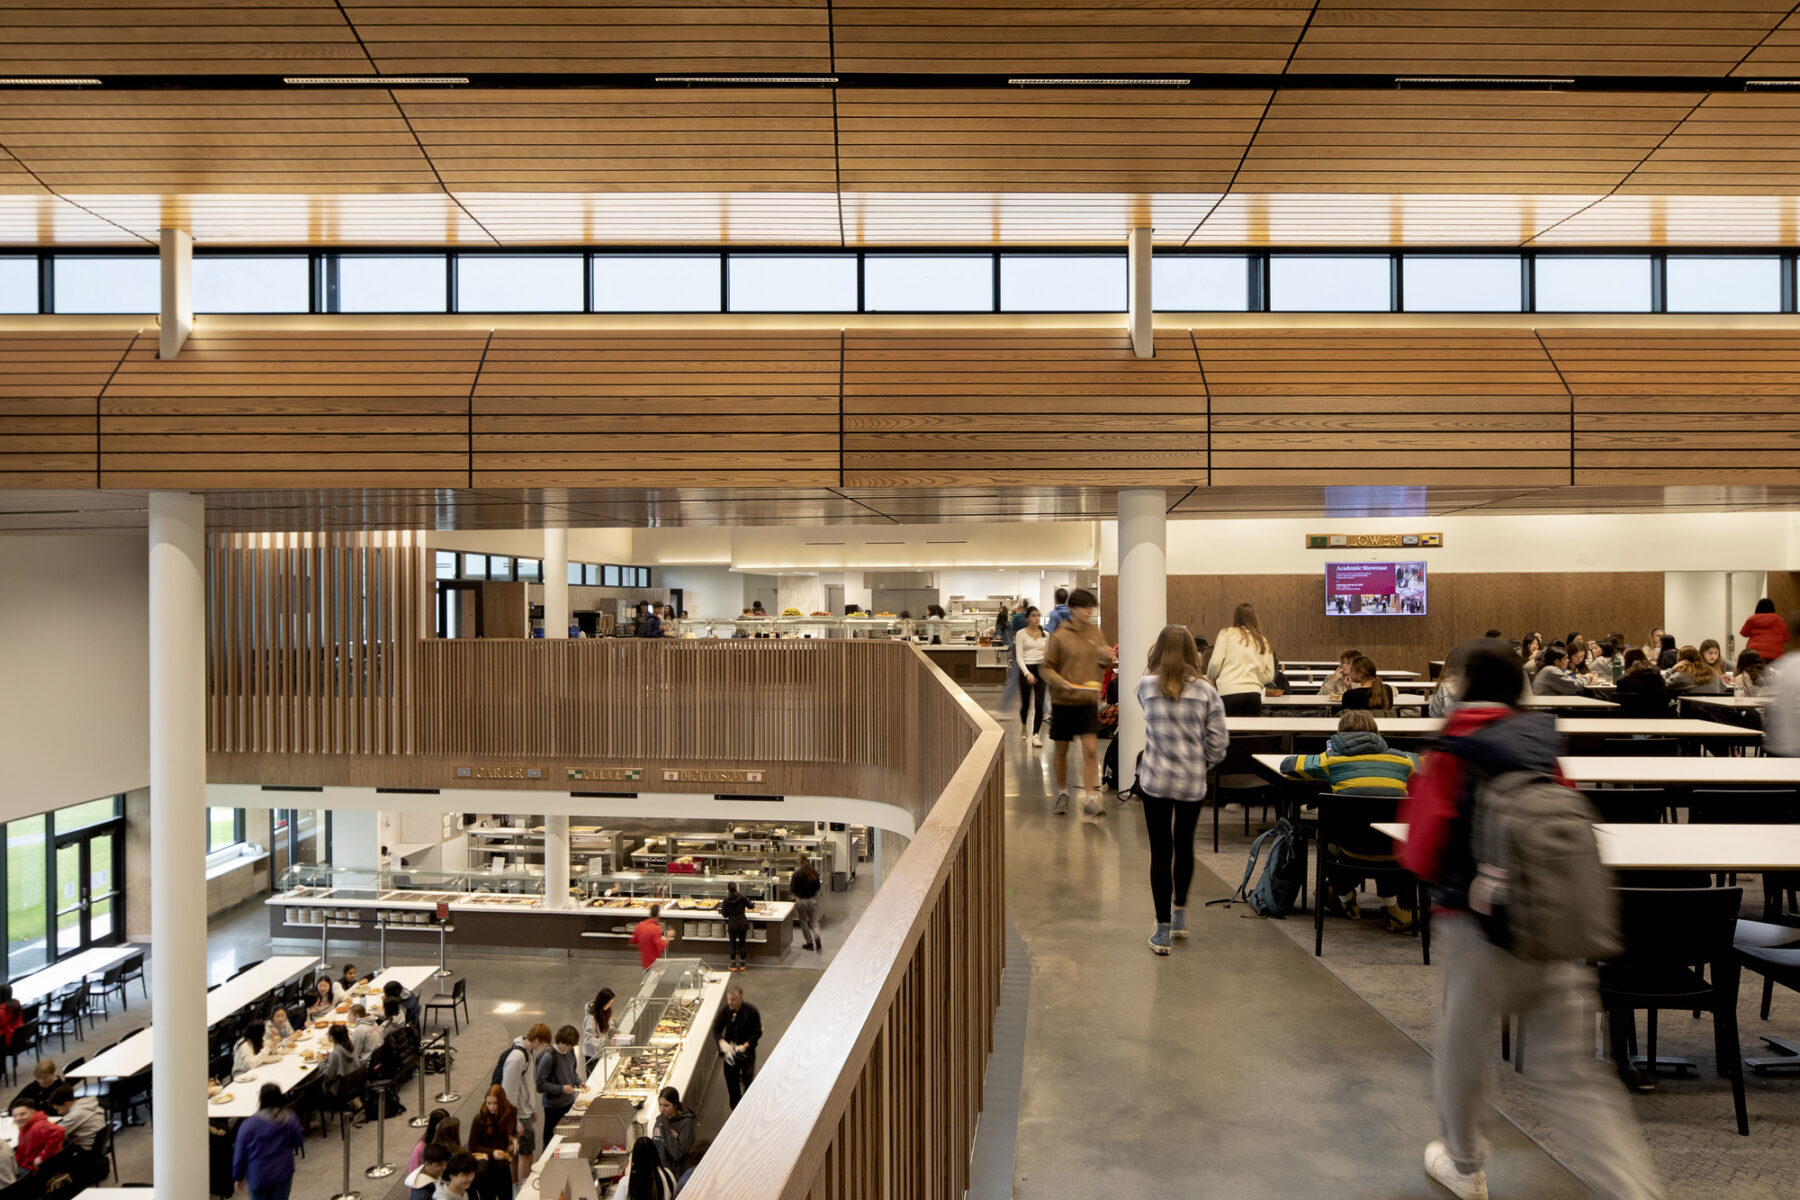 Interior photograph from level two overlooking the dining hall